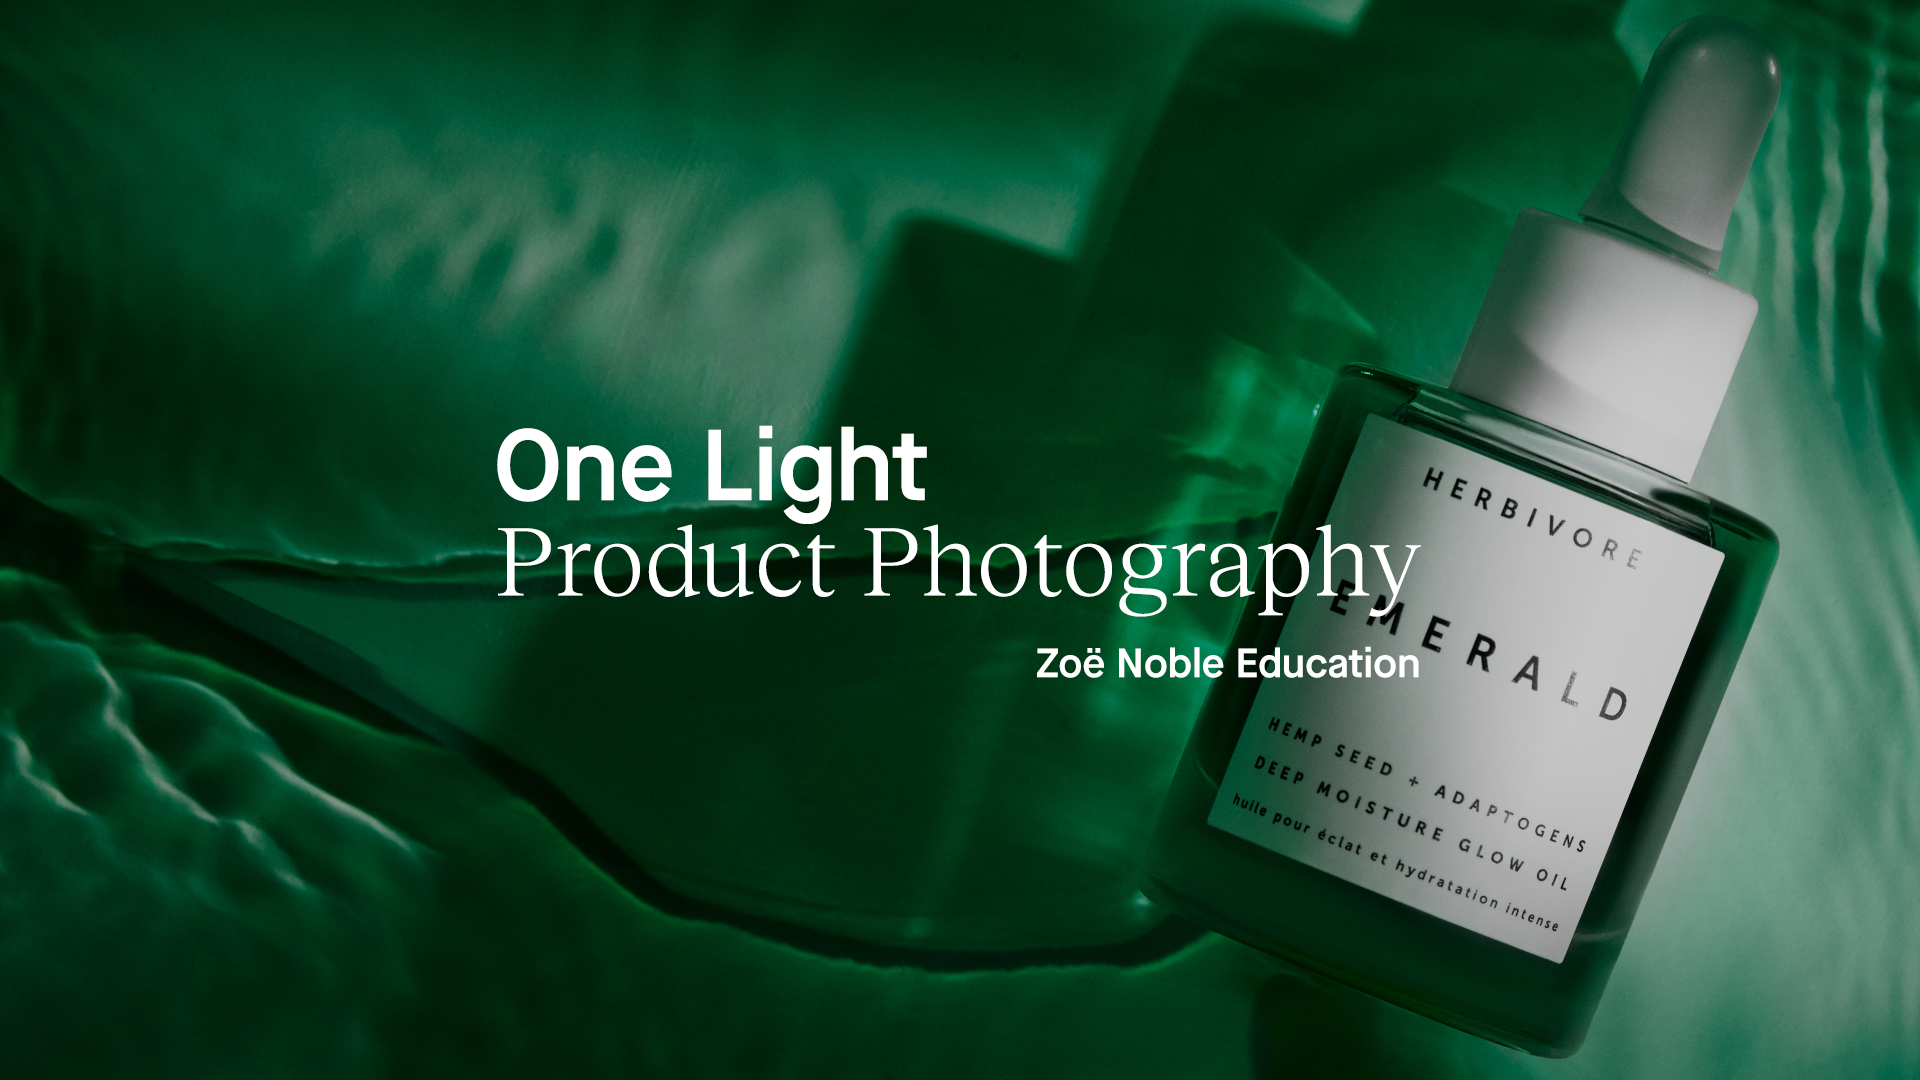 One Light Product Photography by Zoë Noble Education